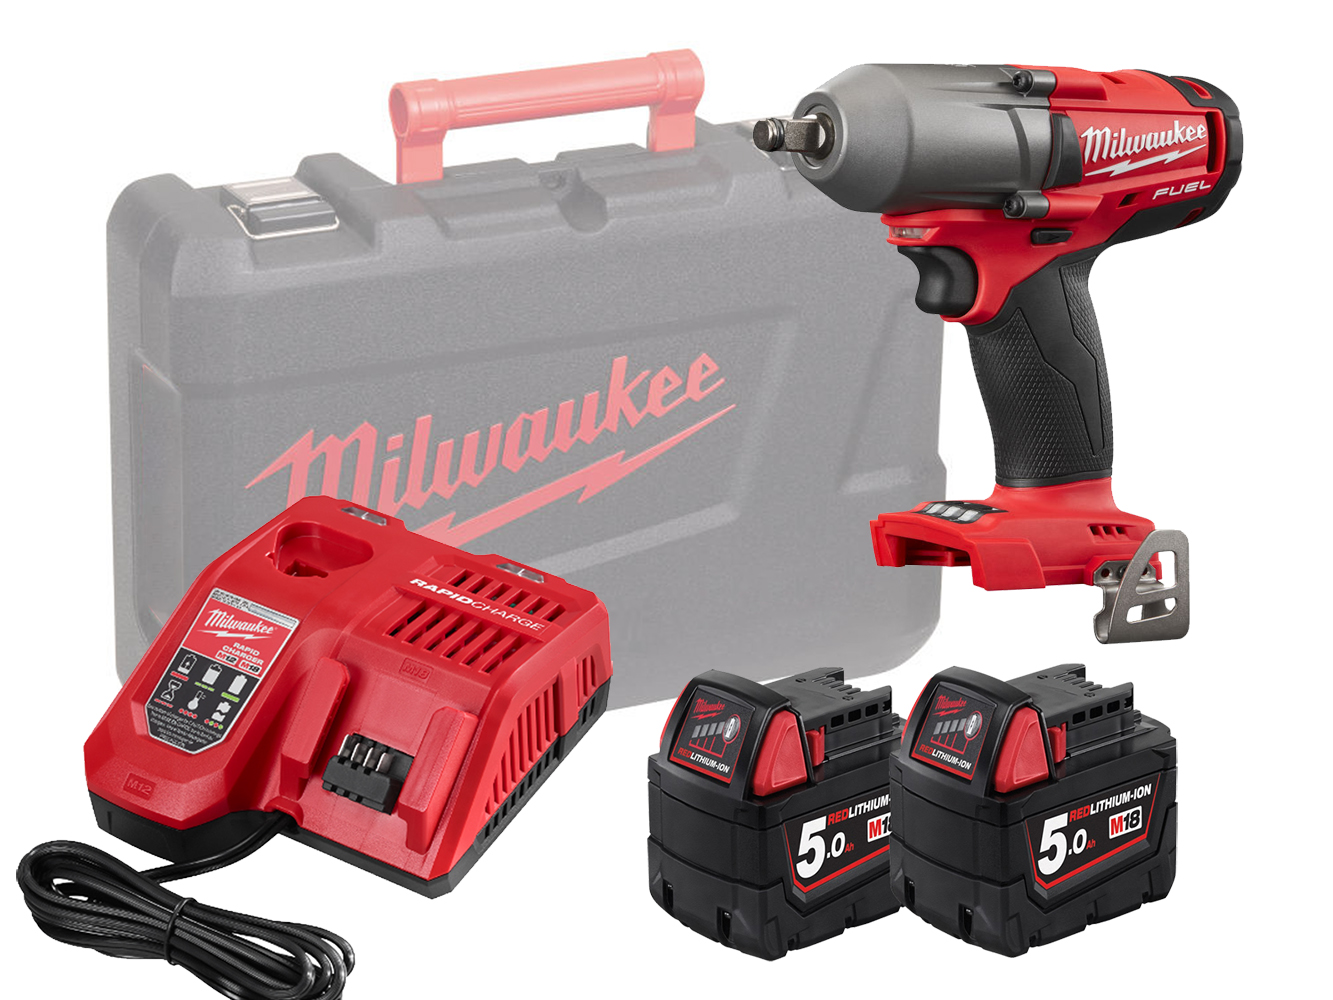 Milwaukee M18FMTIWF12 18V 1/2in Mid Torque Impact Wrench - 5.0Ah Pack